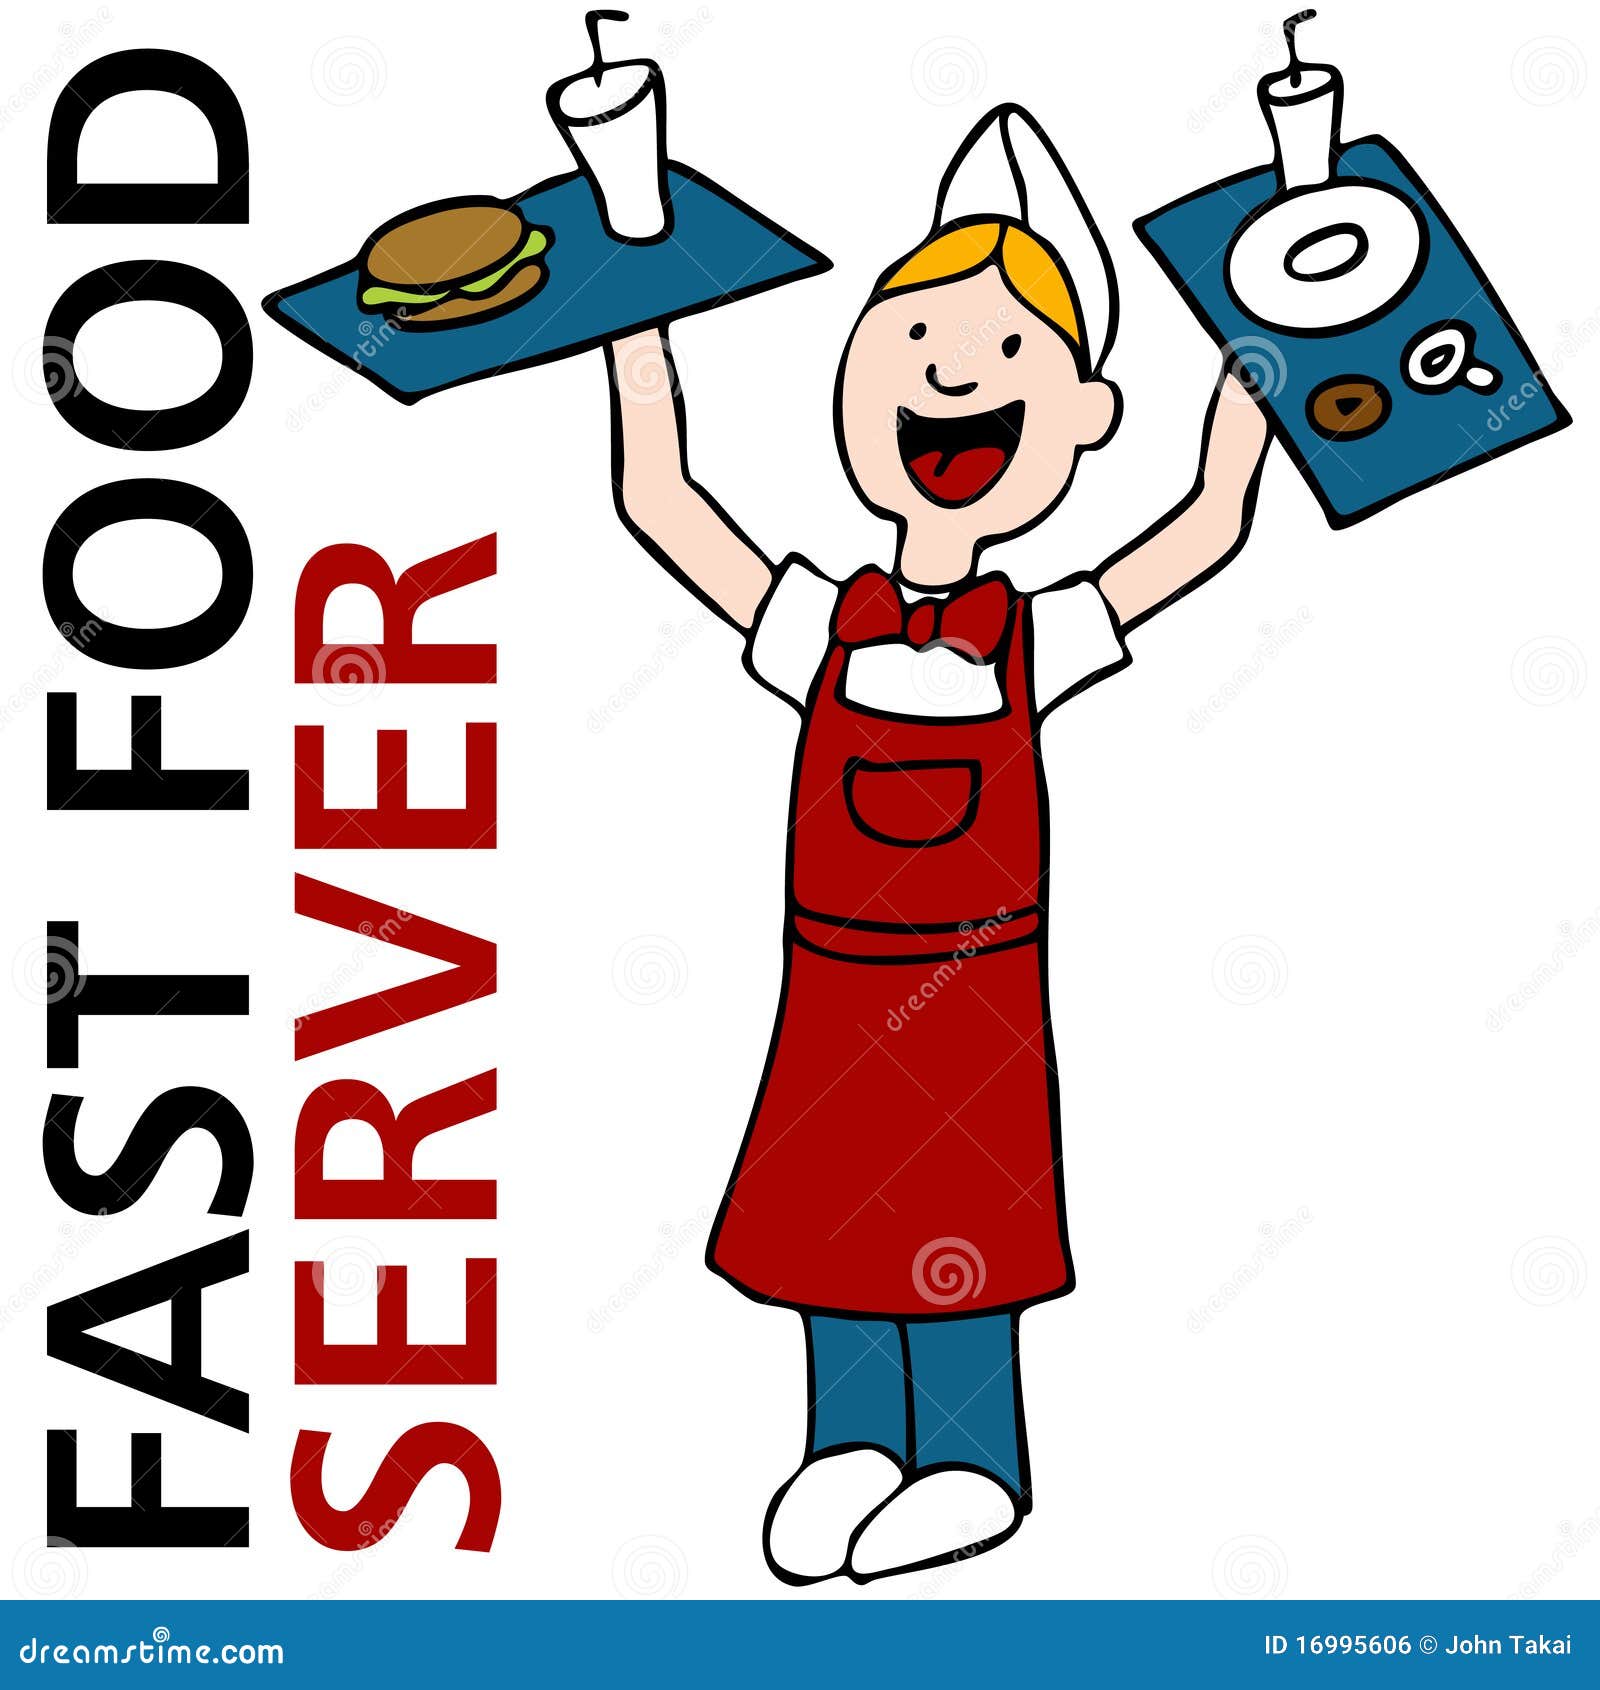 fast food worker clipart - photo #21